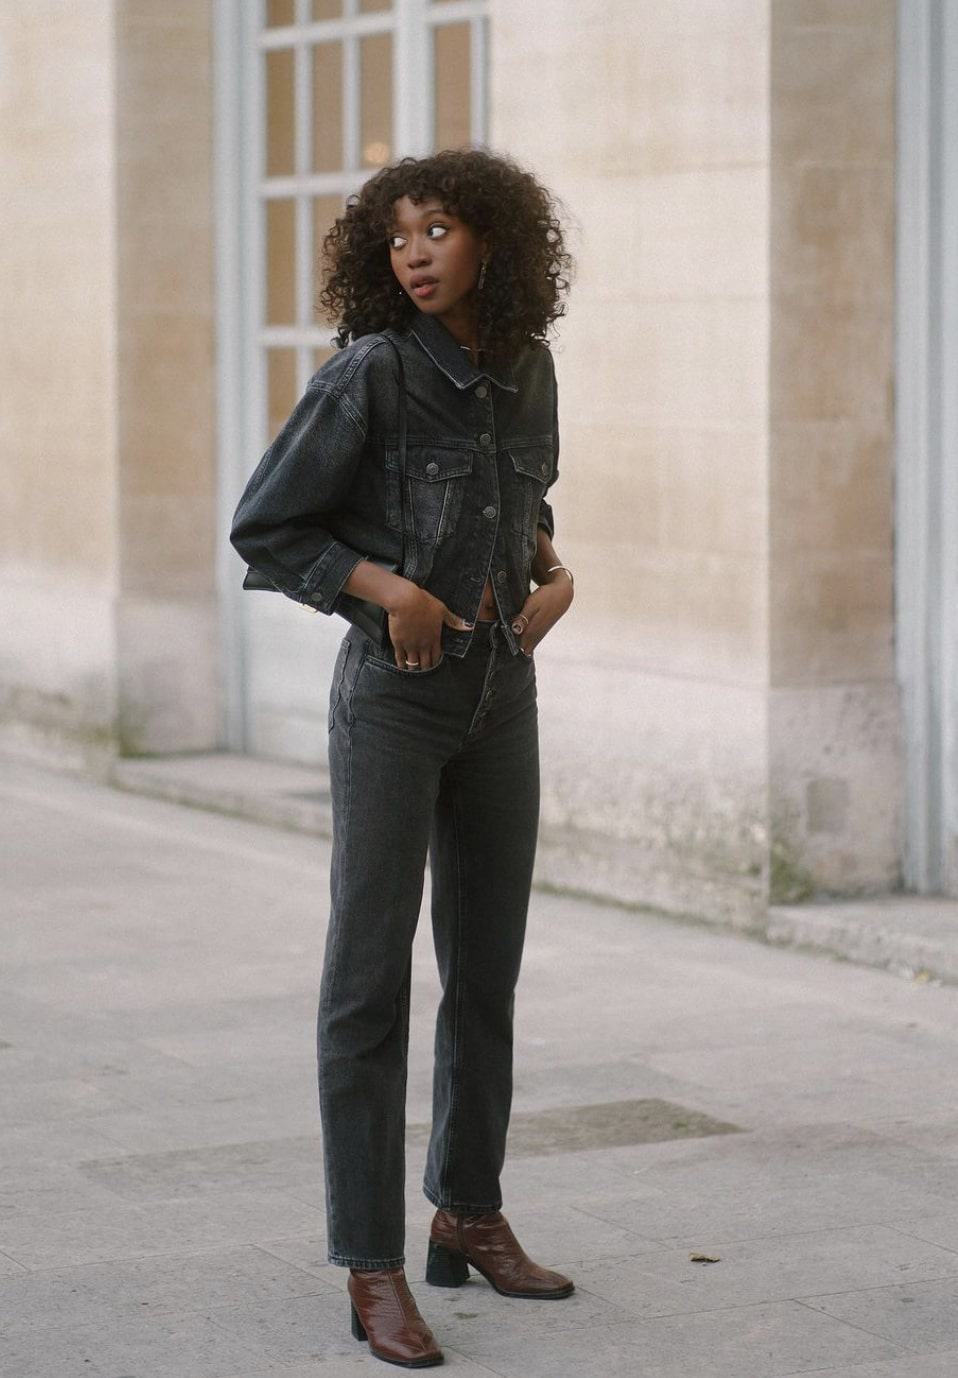 black french woman wearing a faded black denim jacket with faded black denim jeans and brown leather boots